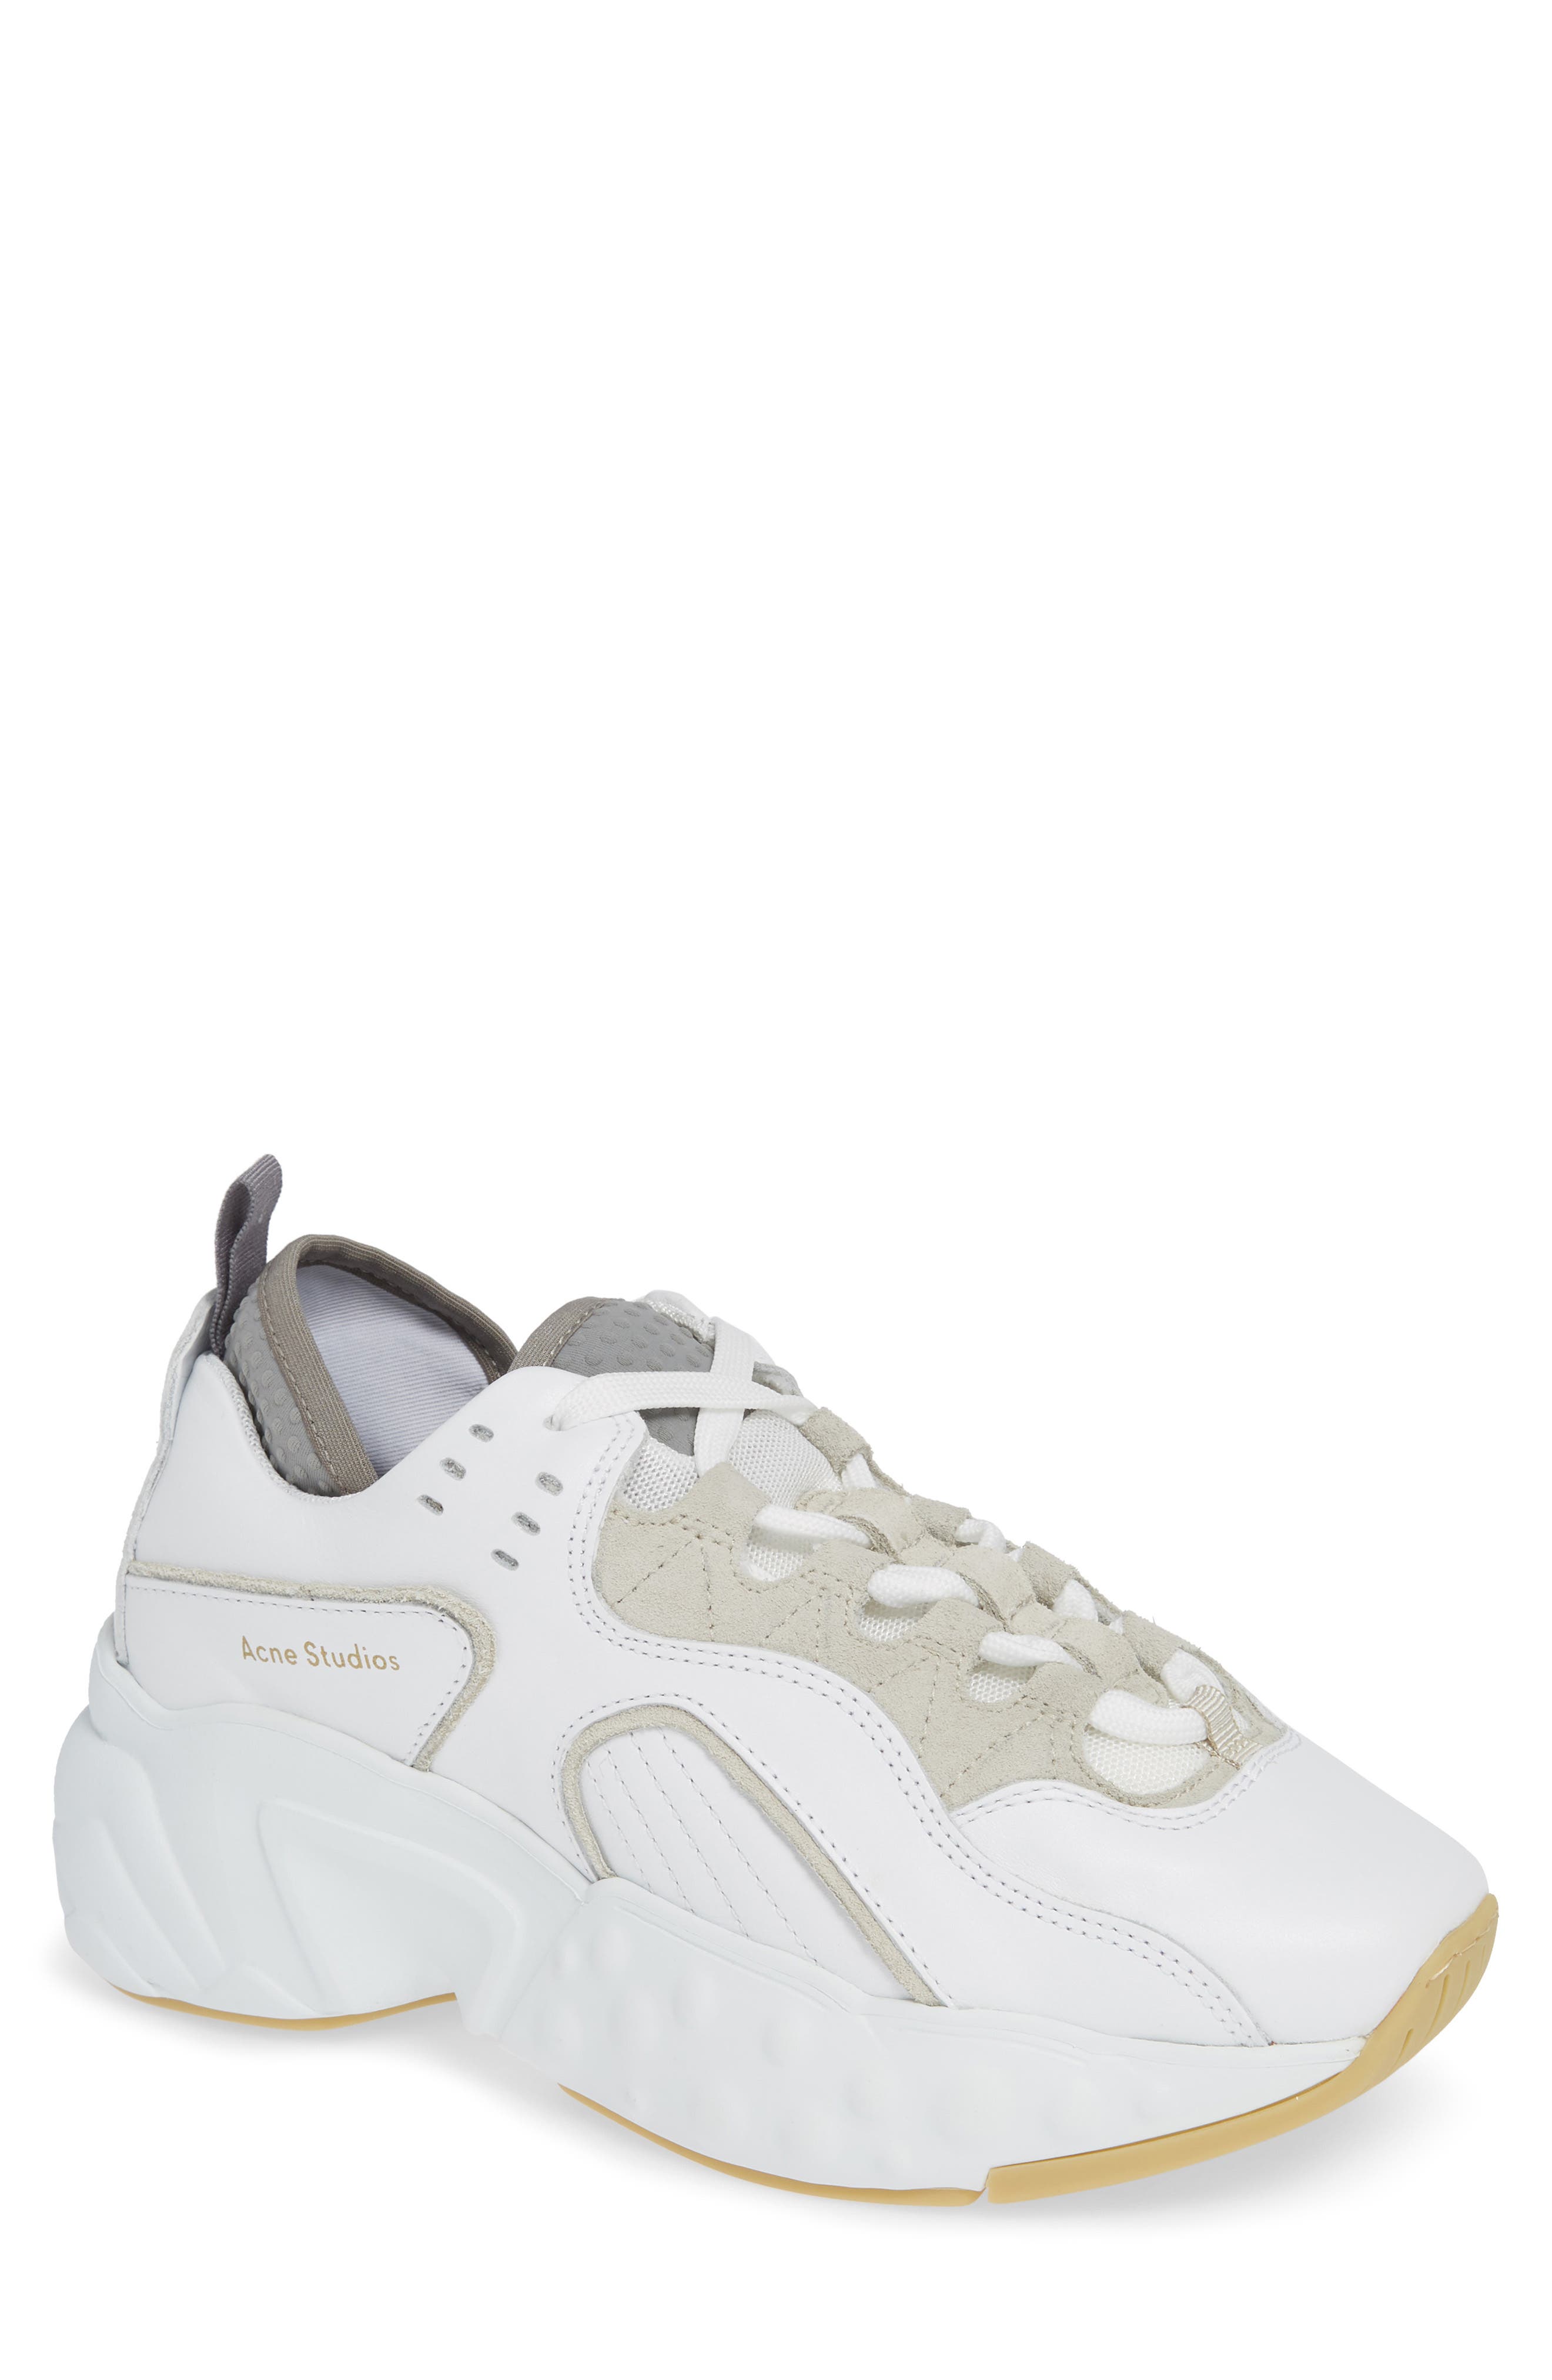 acne chunky sneakers